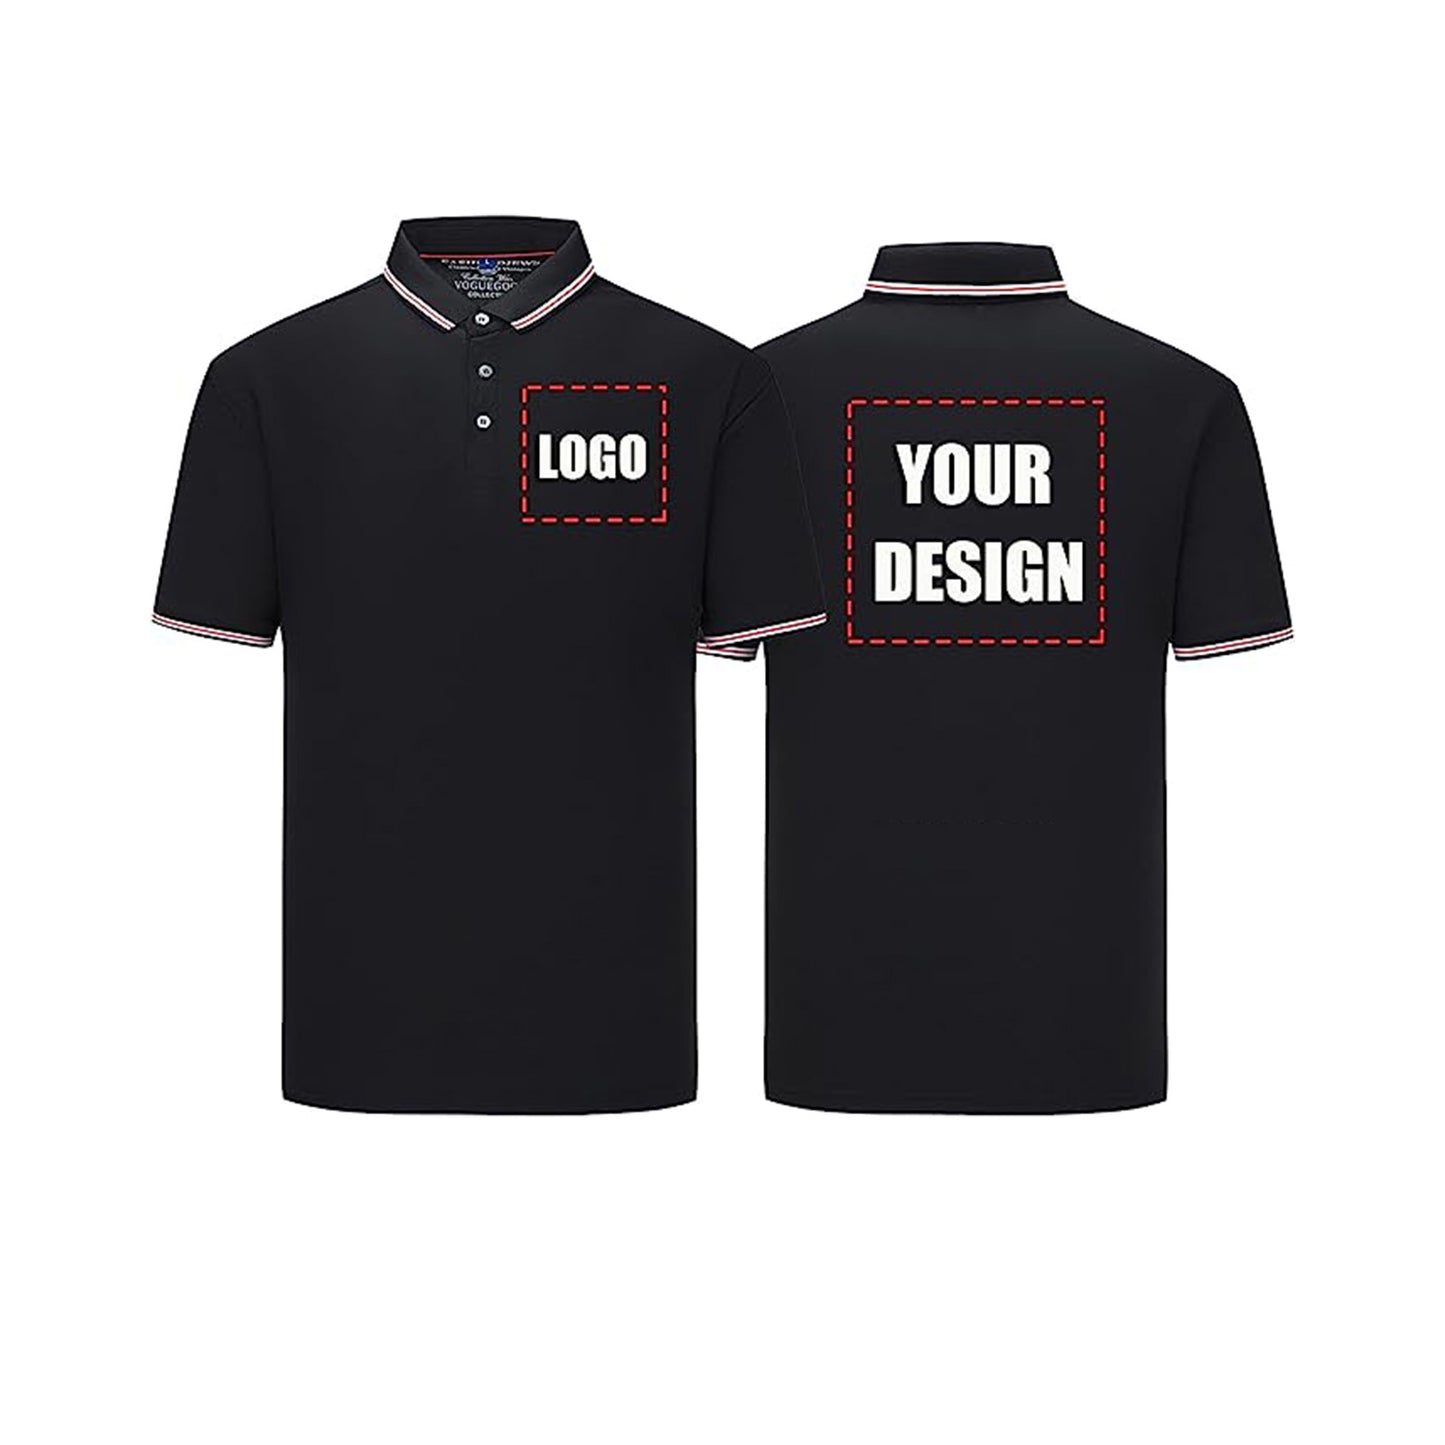 custom black polo shirts with logo text your design from 1PC size S M L XL 2XL